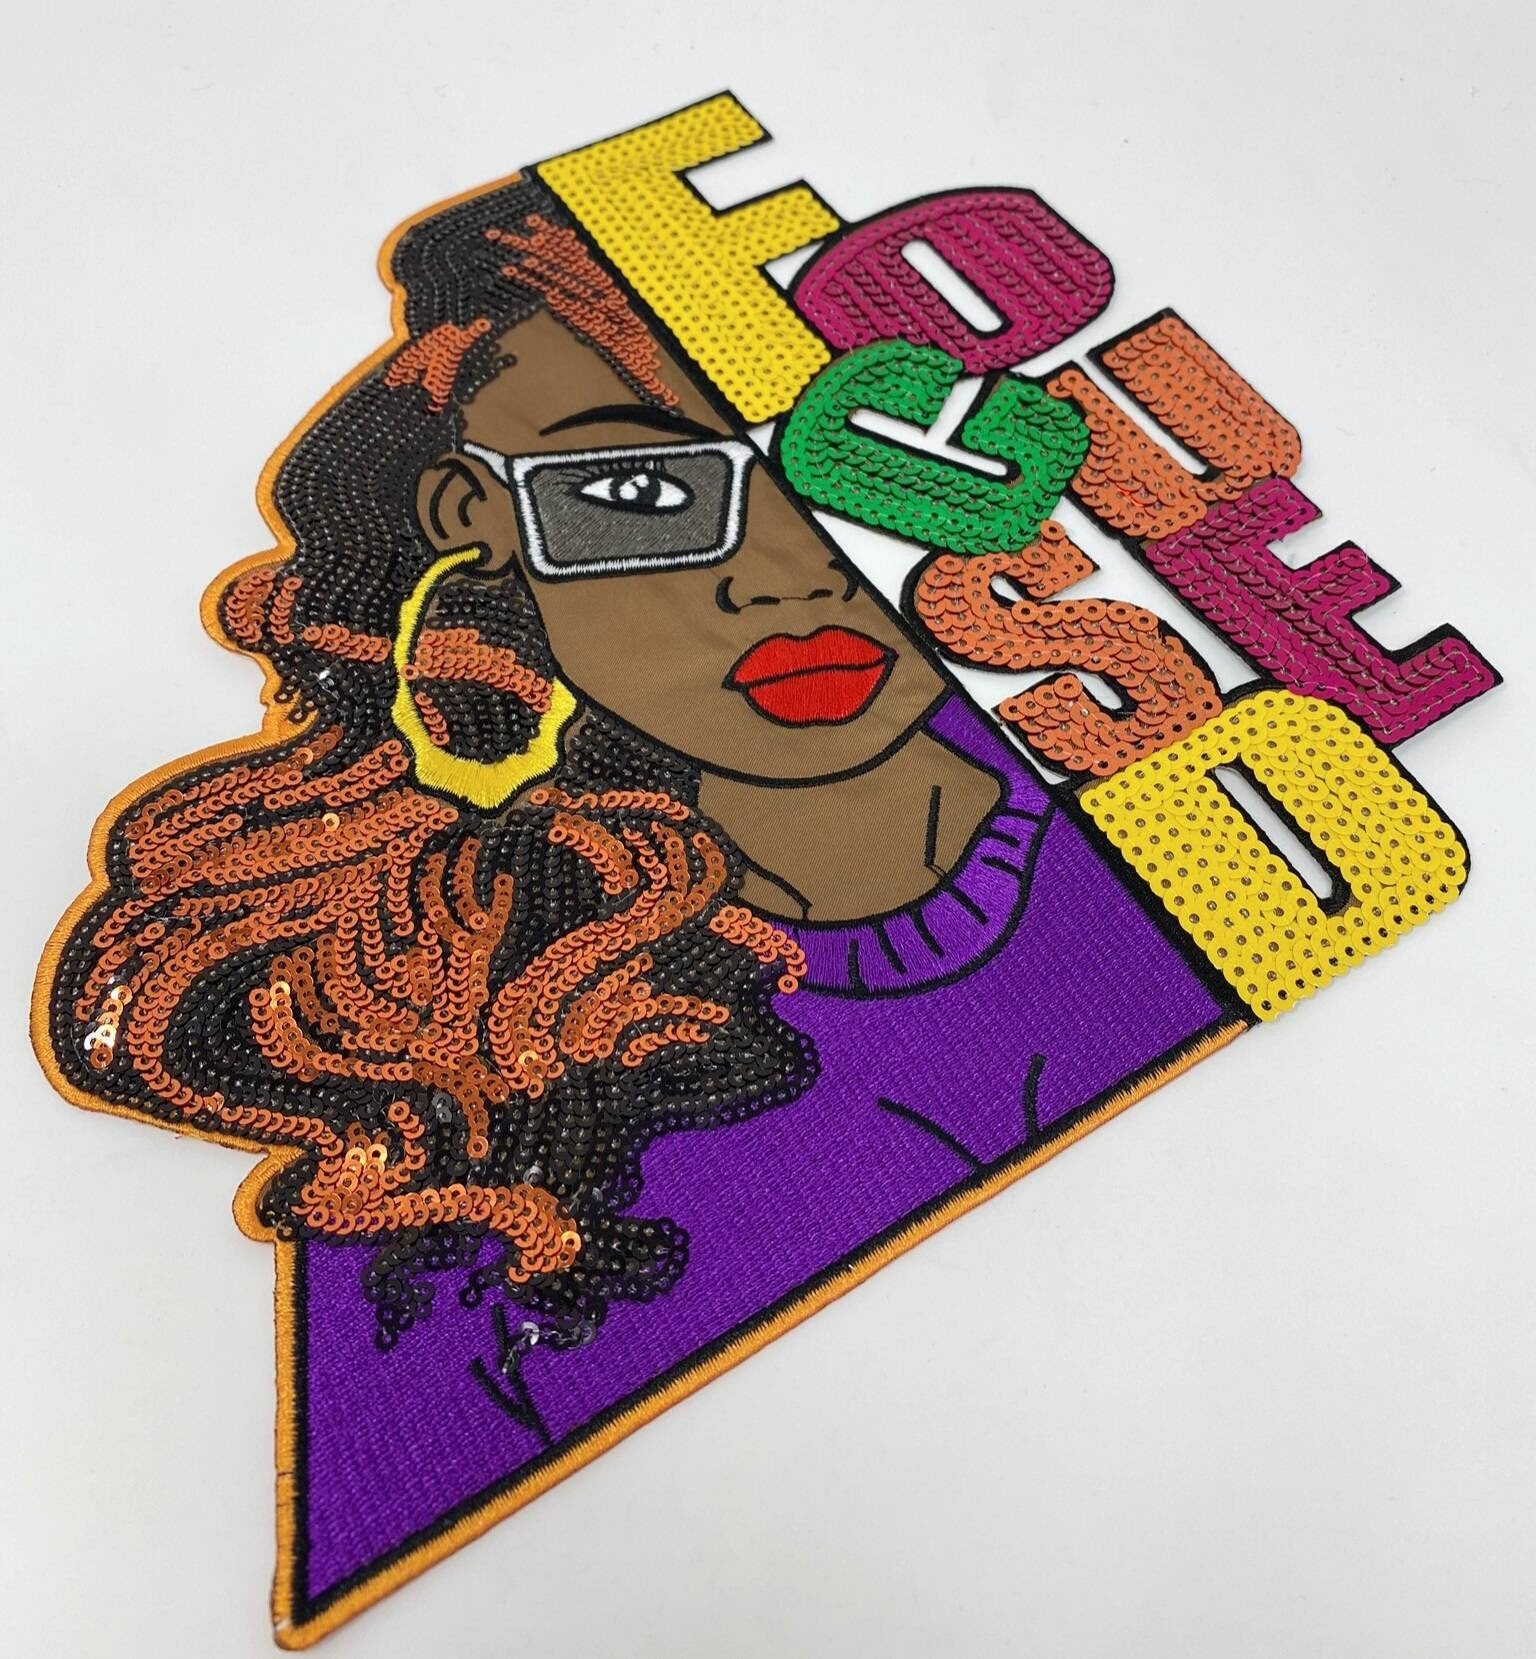 New, "Focused" Sequins, Embroidery, & Satin, 10" Patch, Iron-on Exclusive Applique, Large Back Patch, Sequins Patch, Jacket Patch